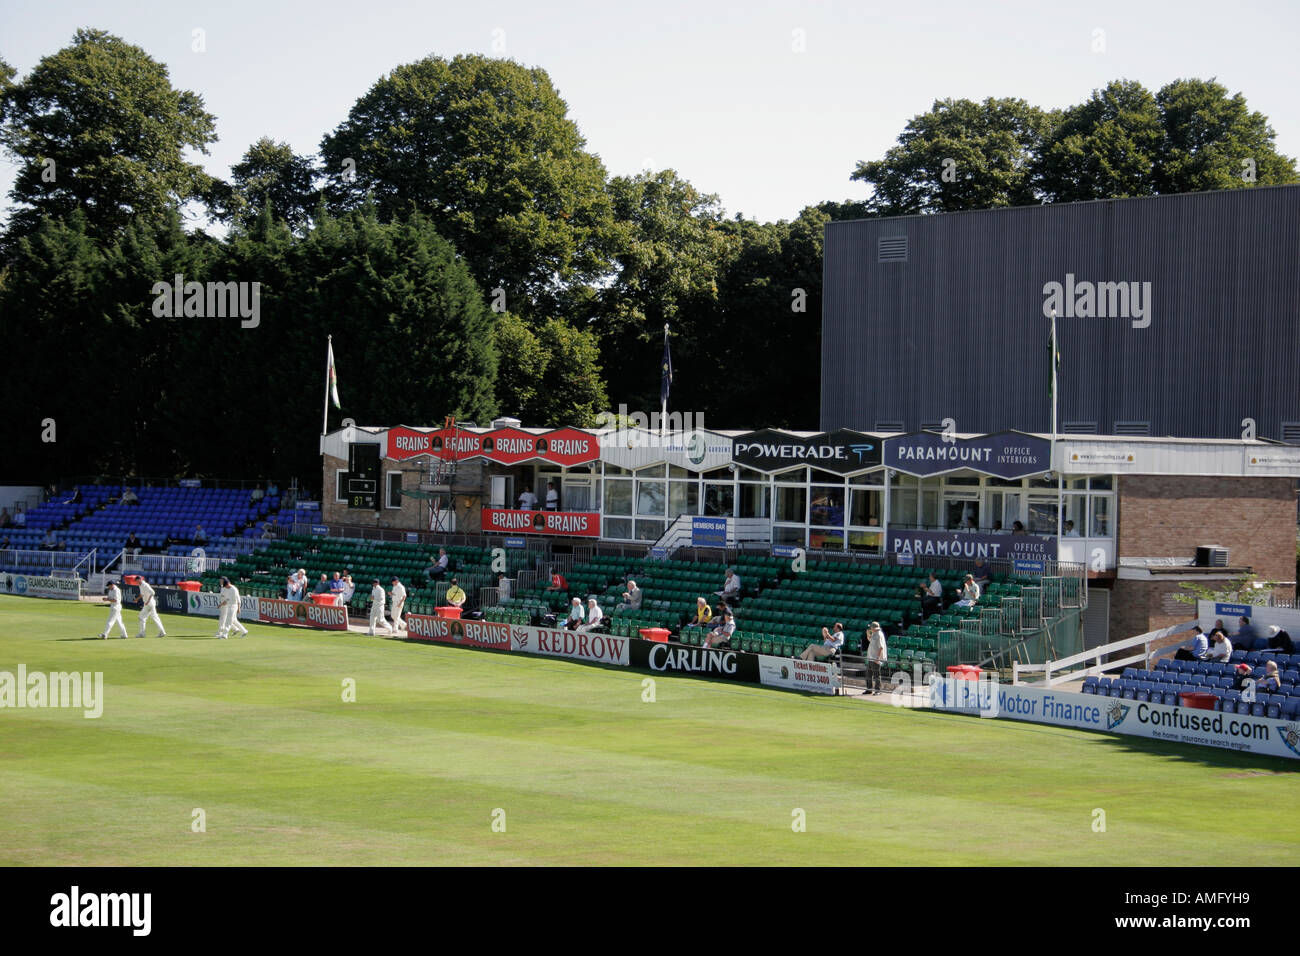 Cricketers Walking onto the field of play from the Pavilion, Glamorgan County Cricket Club, Sophia Gardens, Cardiff, Wales, U.K. Stock Photo